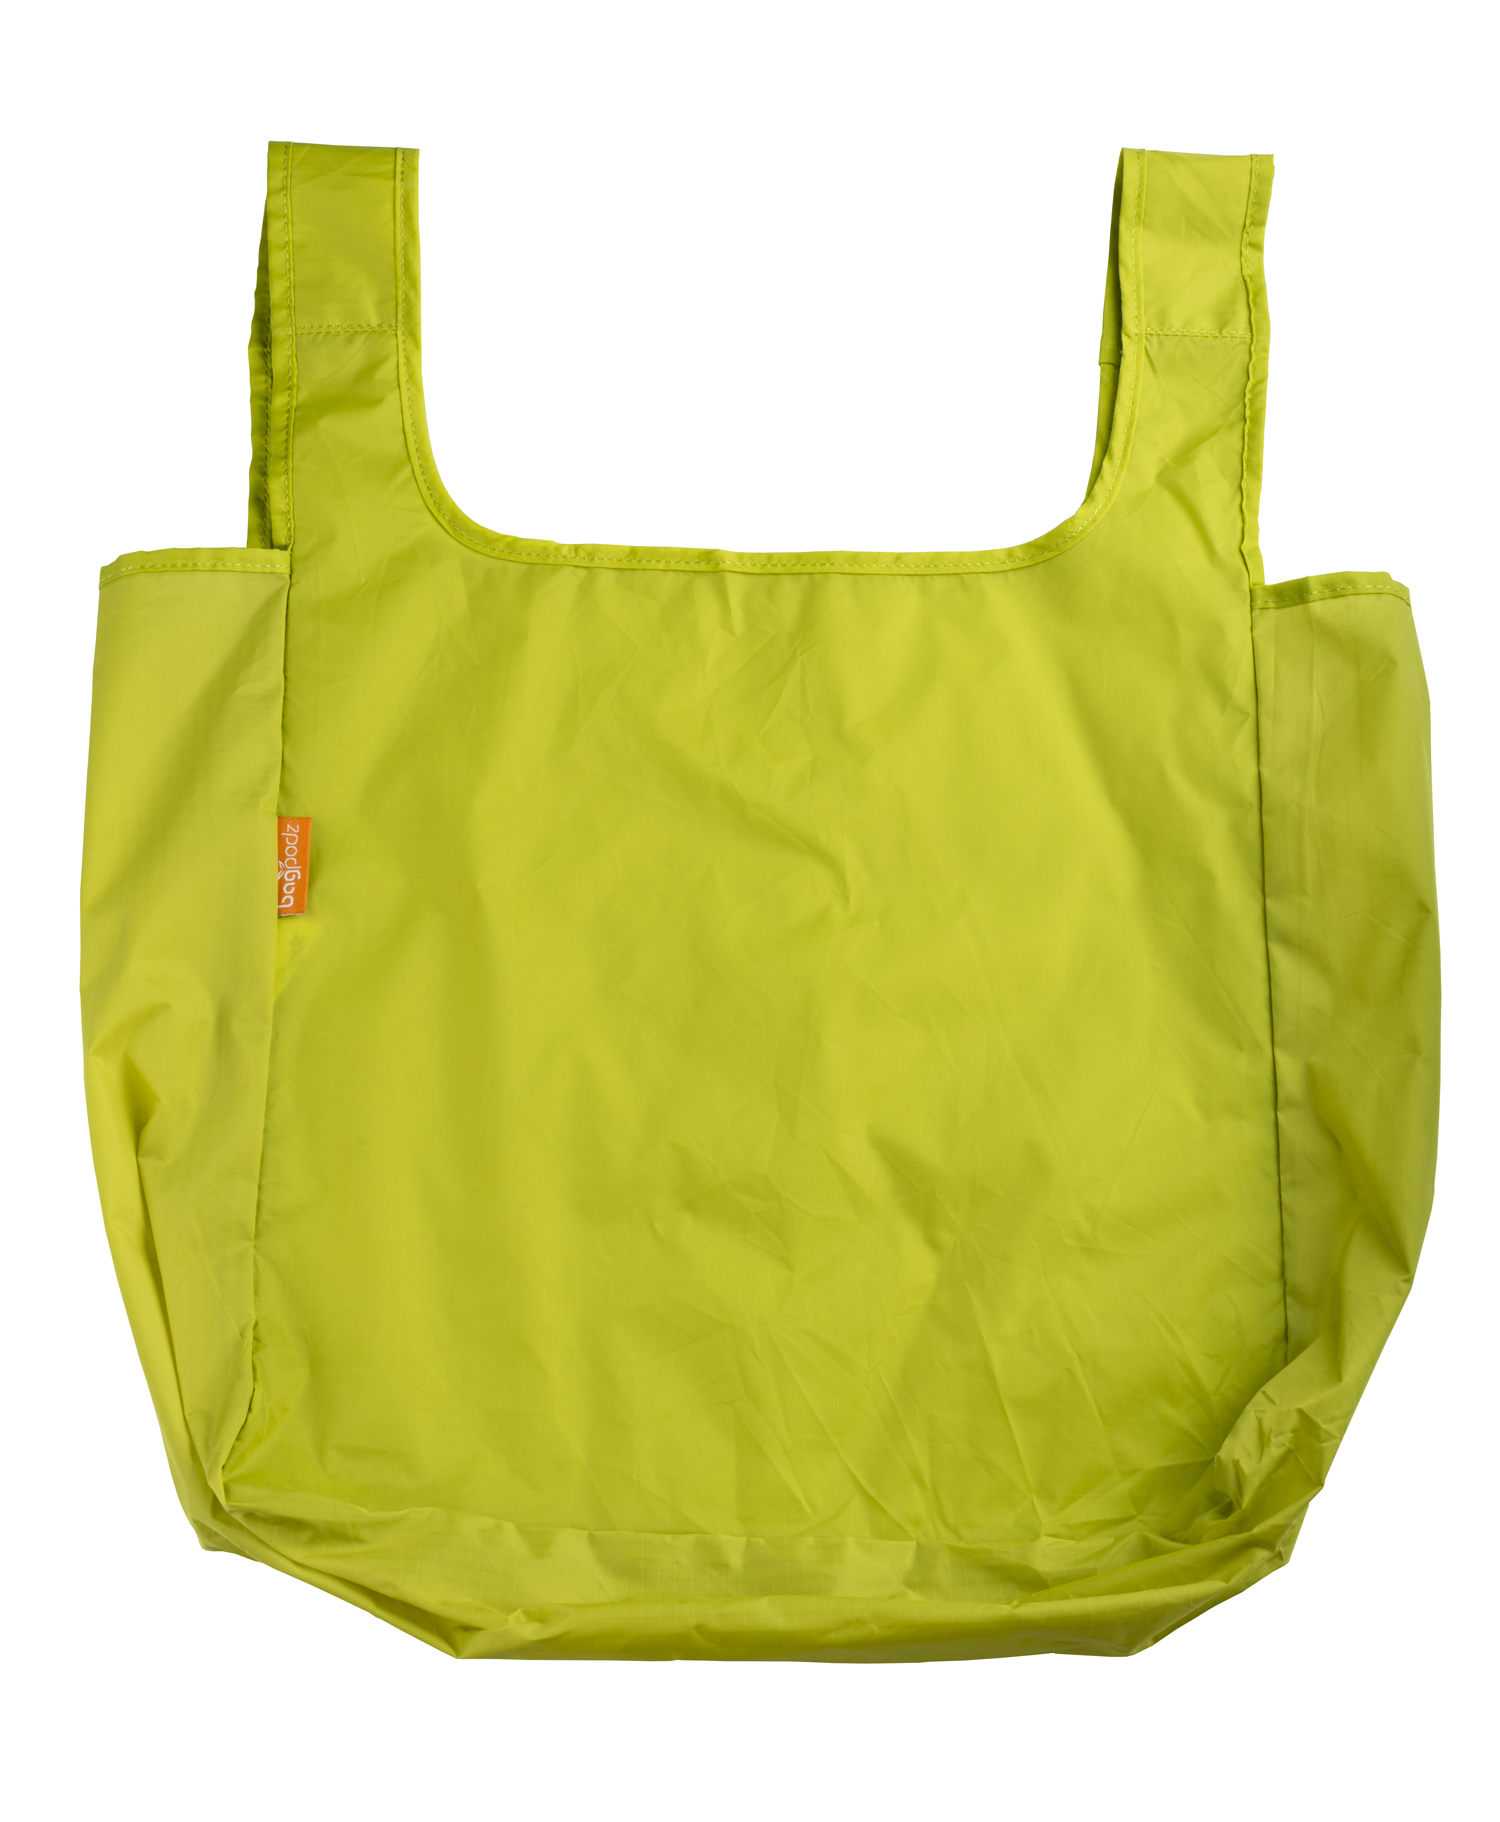 Replacement Bags (2 Bags) — BagPodz | Reusable Bags Made Easy